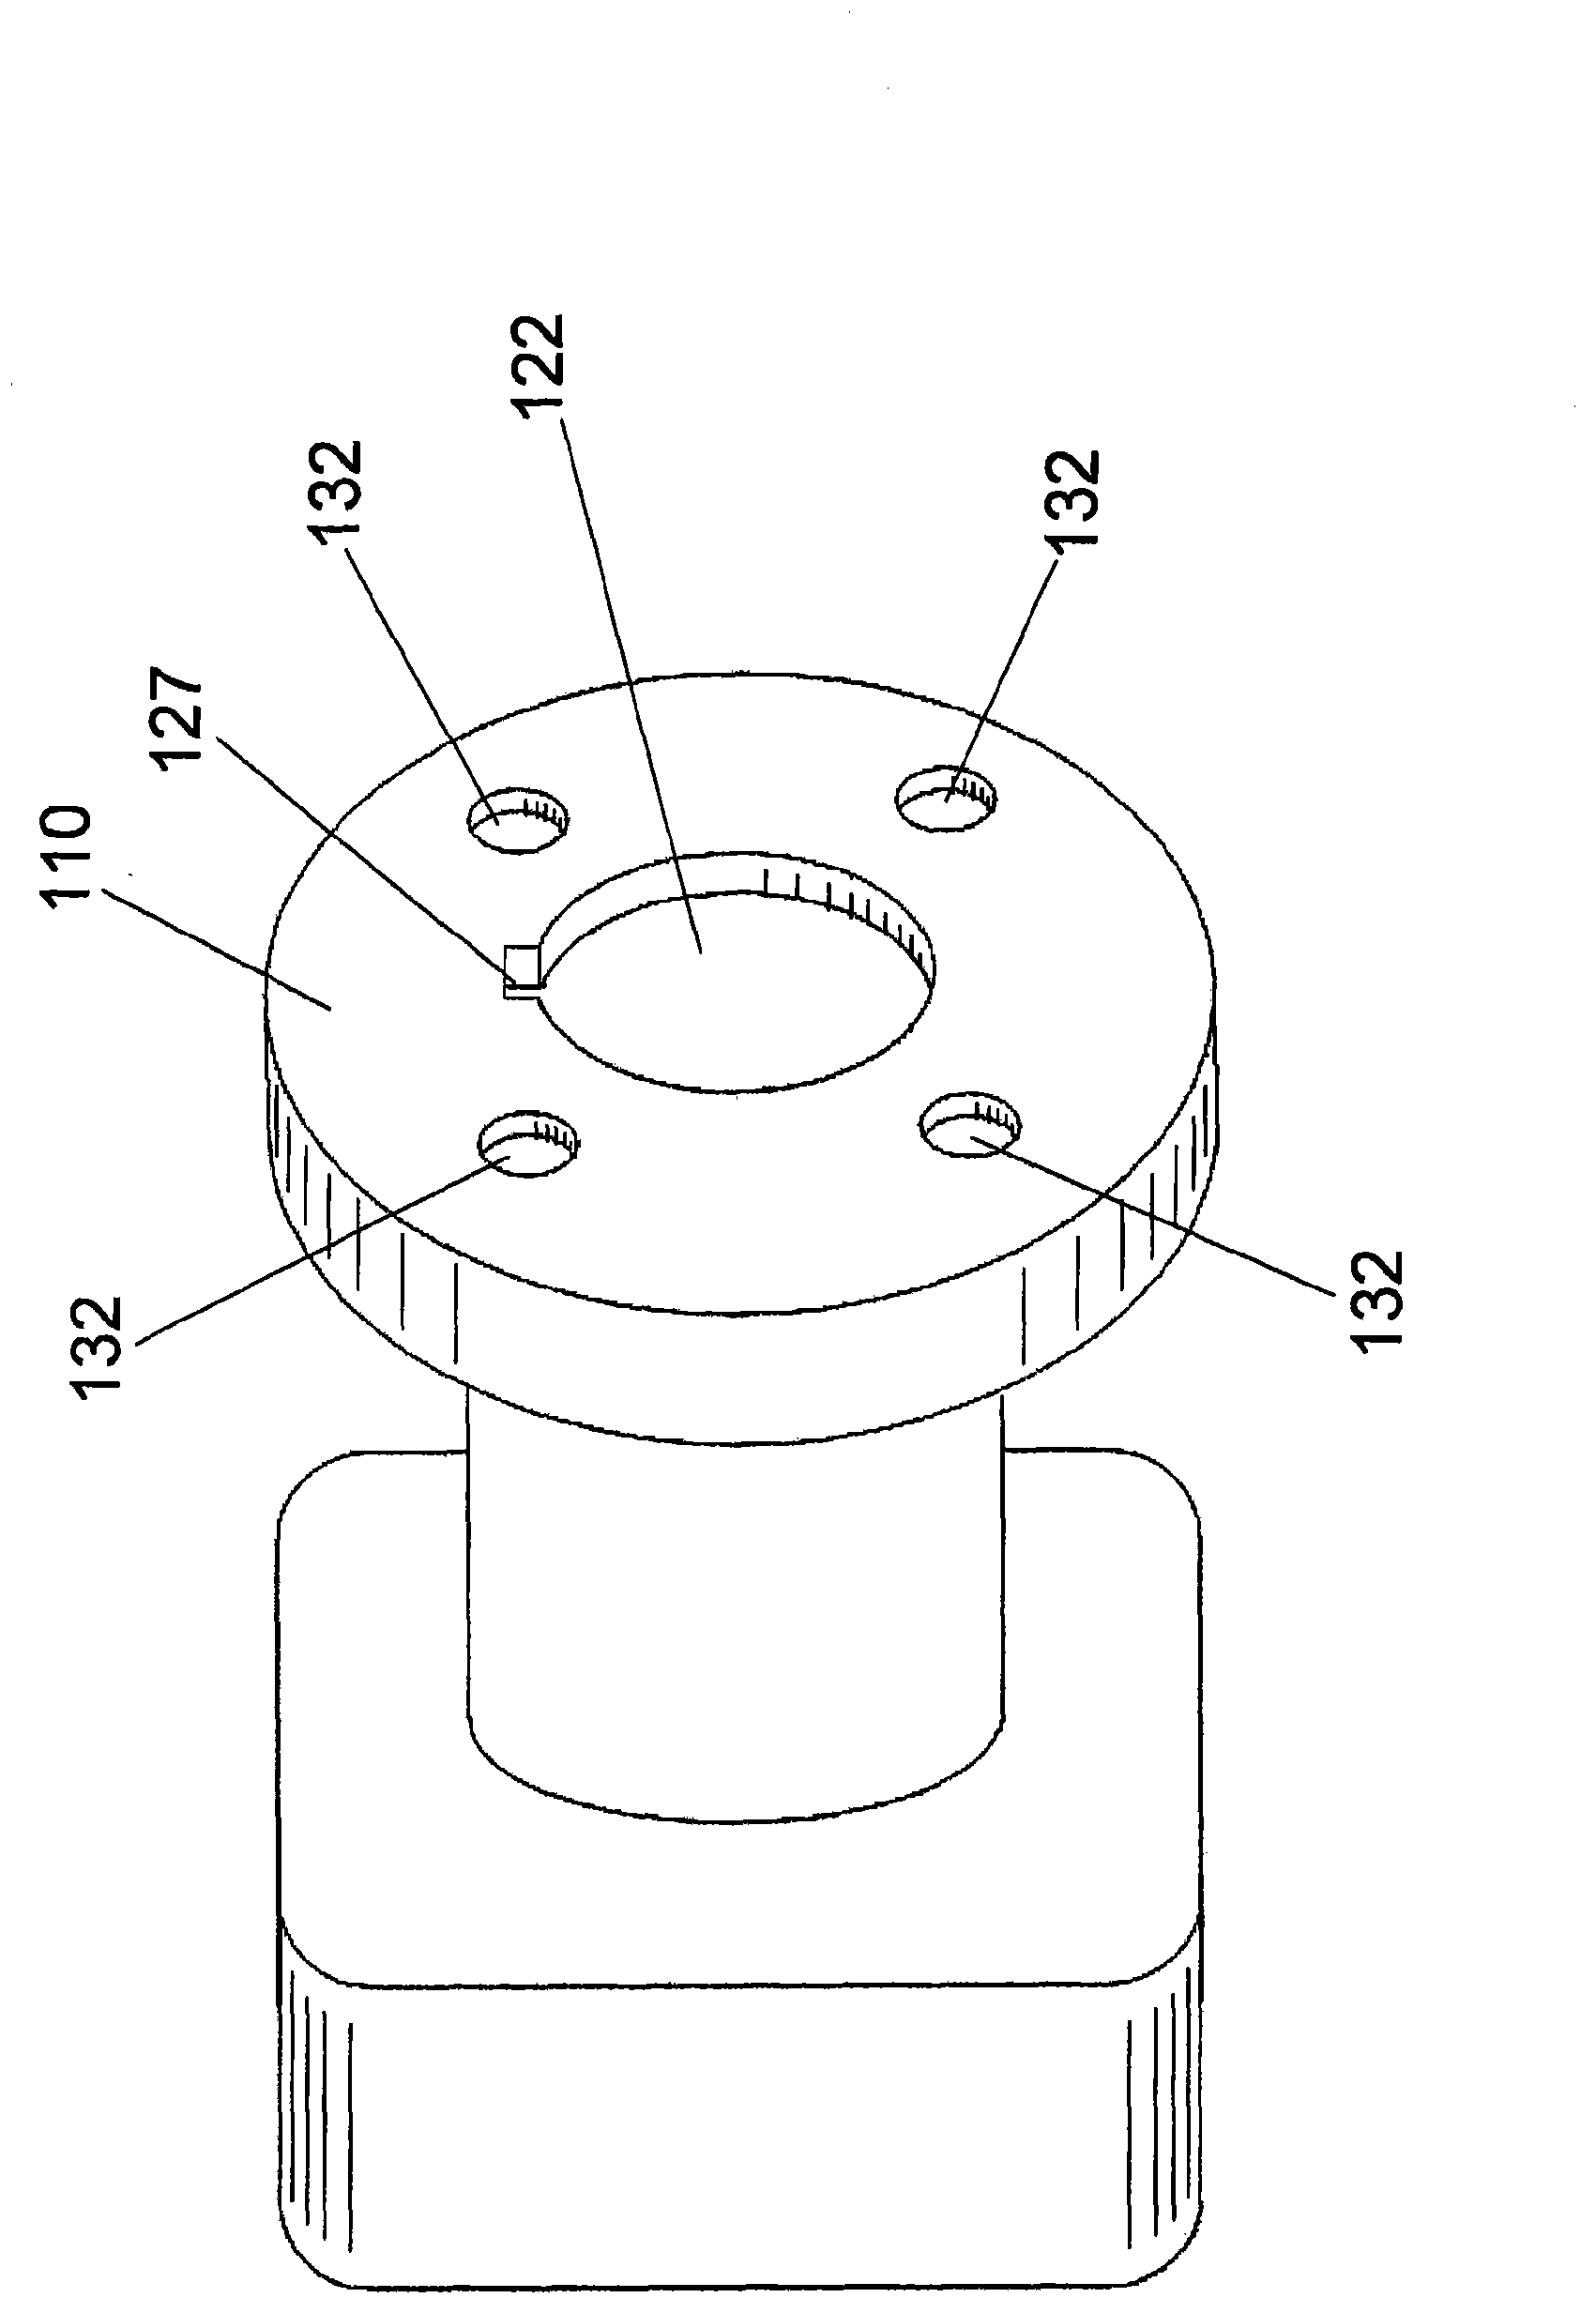 Method, apparatus and computer program product for simplifying representation of a computer-aided design model